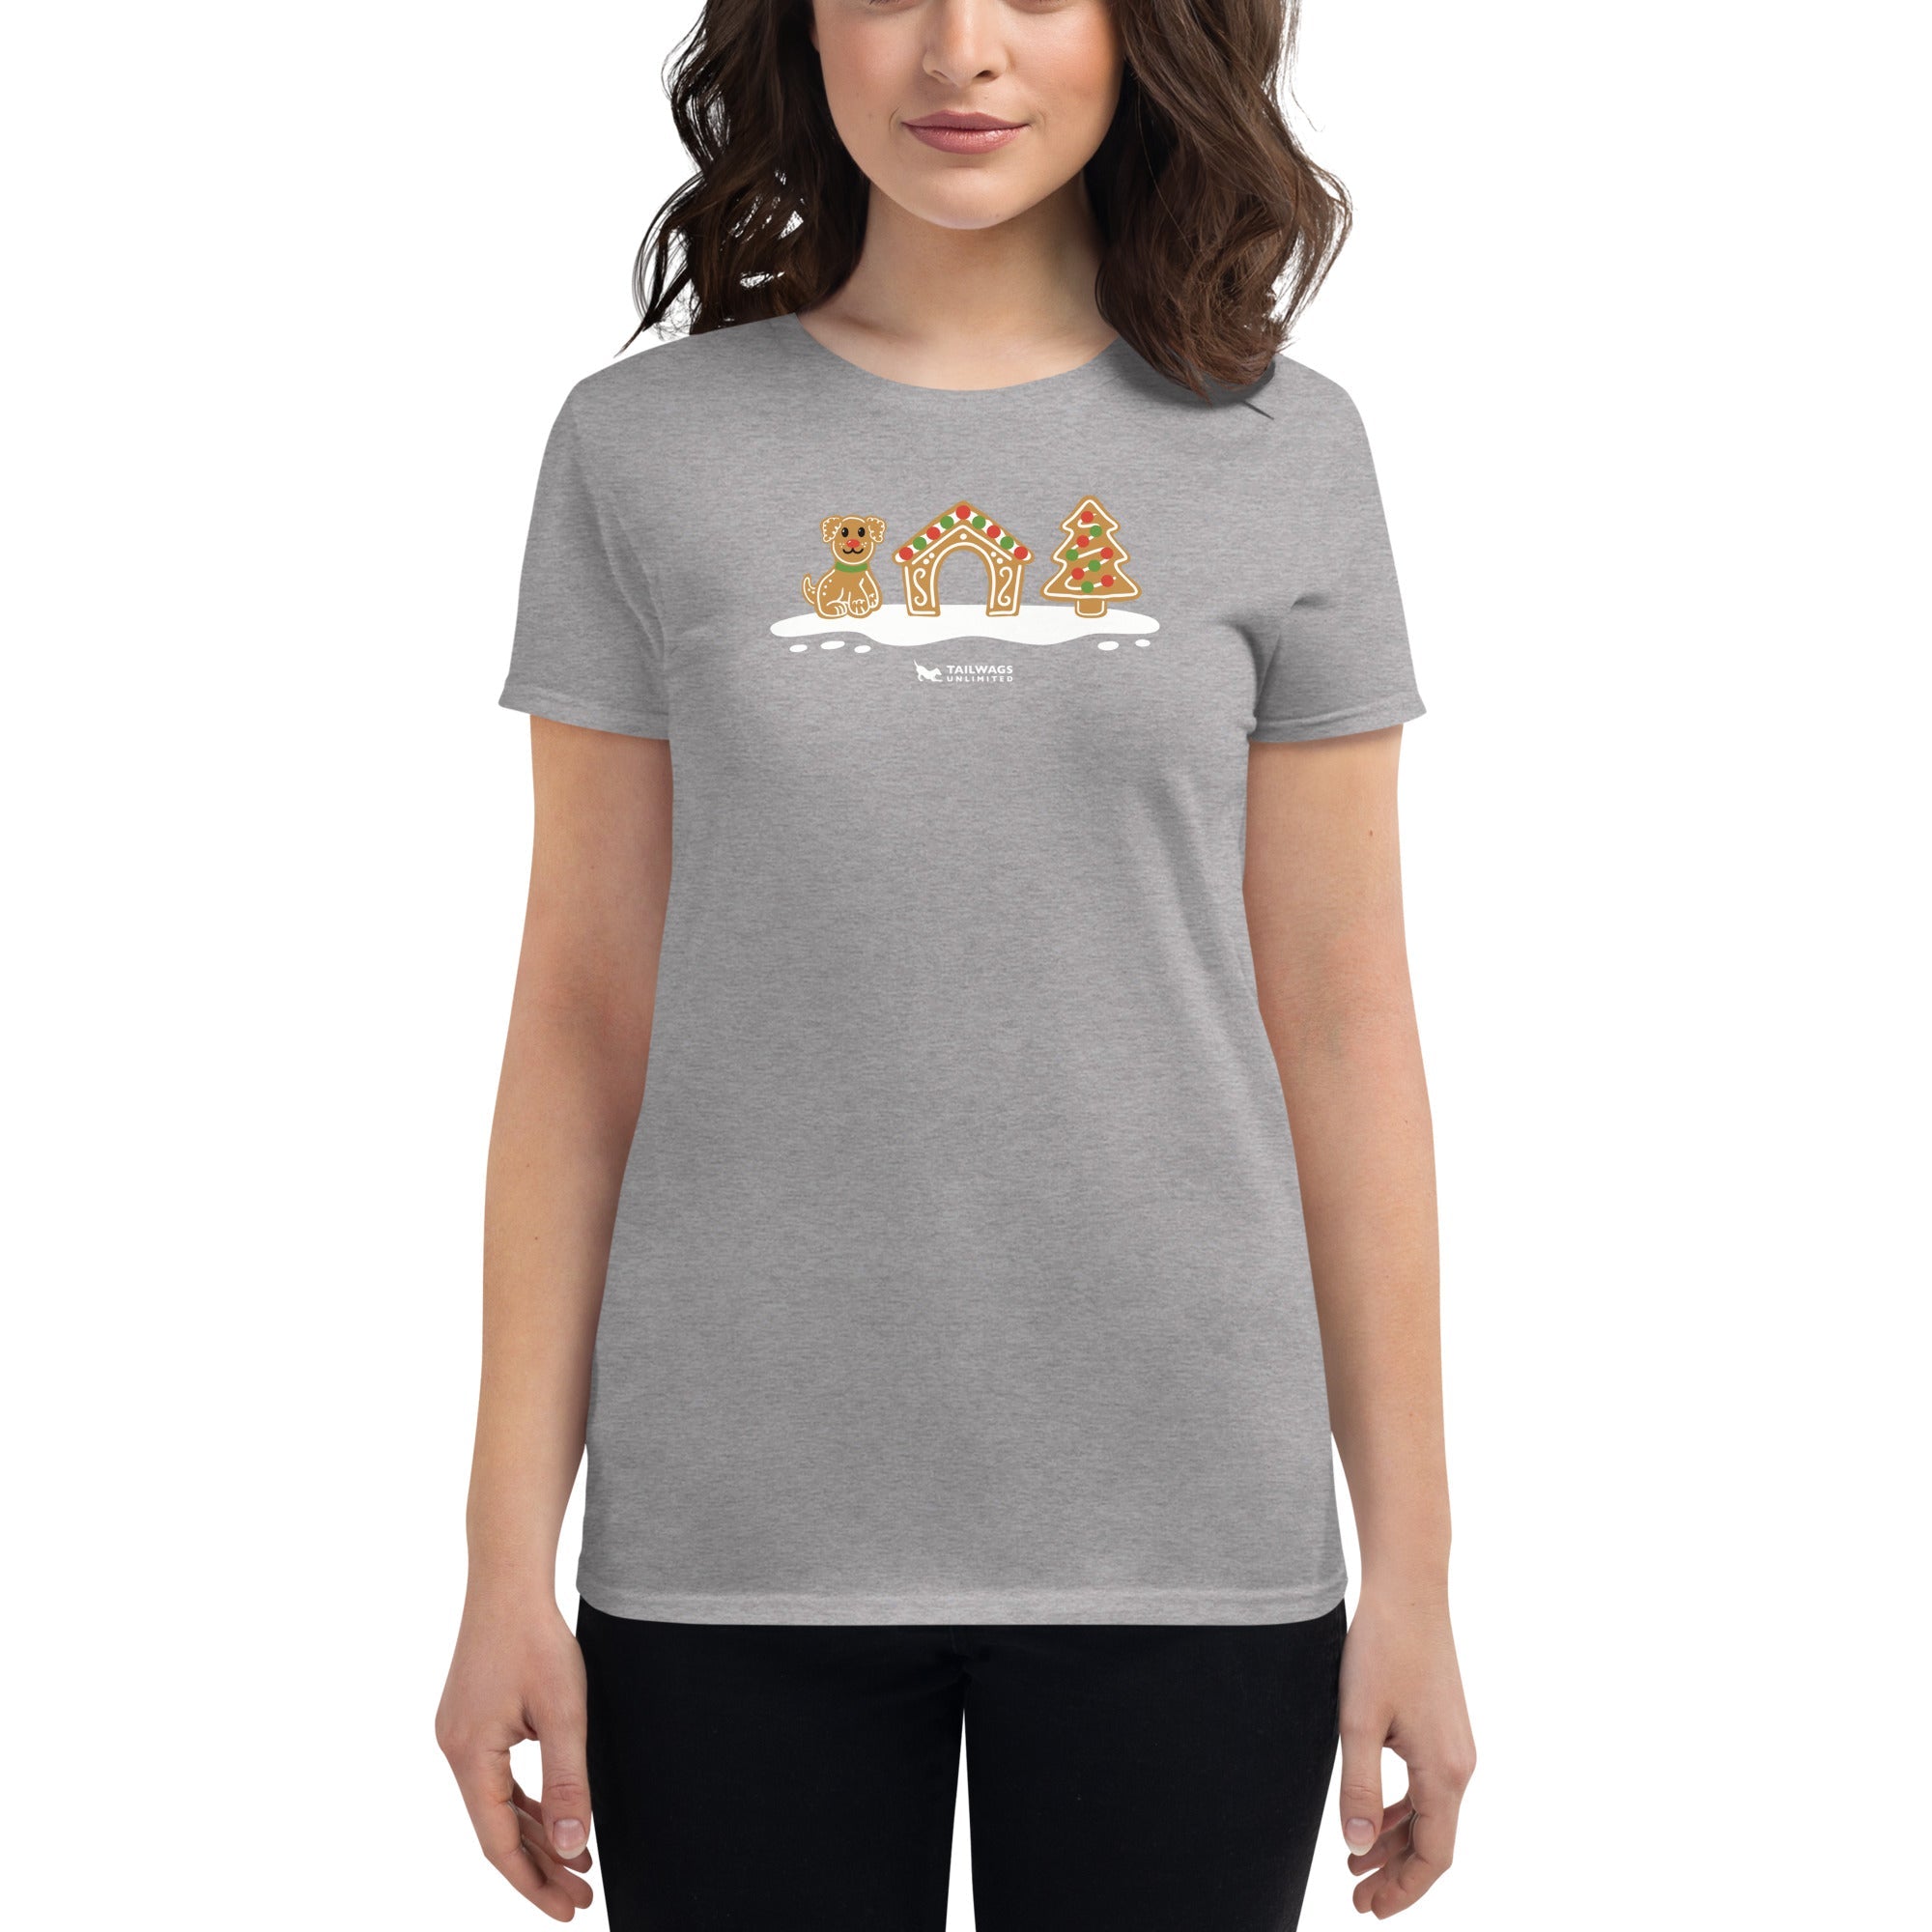 Gingerbread Doghouse Women's Fit T-Shirt - TAILWAGS UNLIMITED